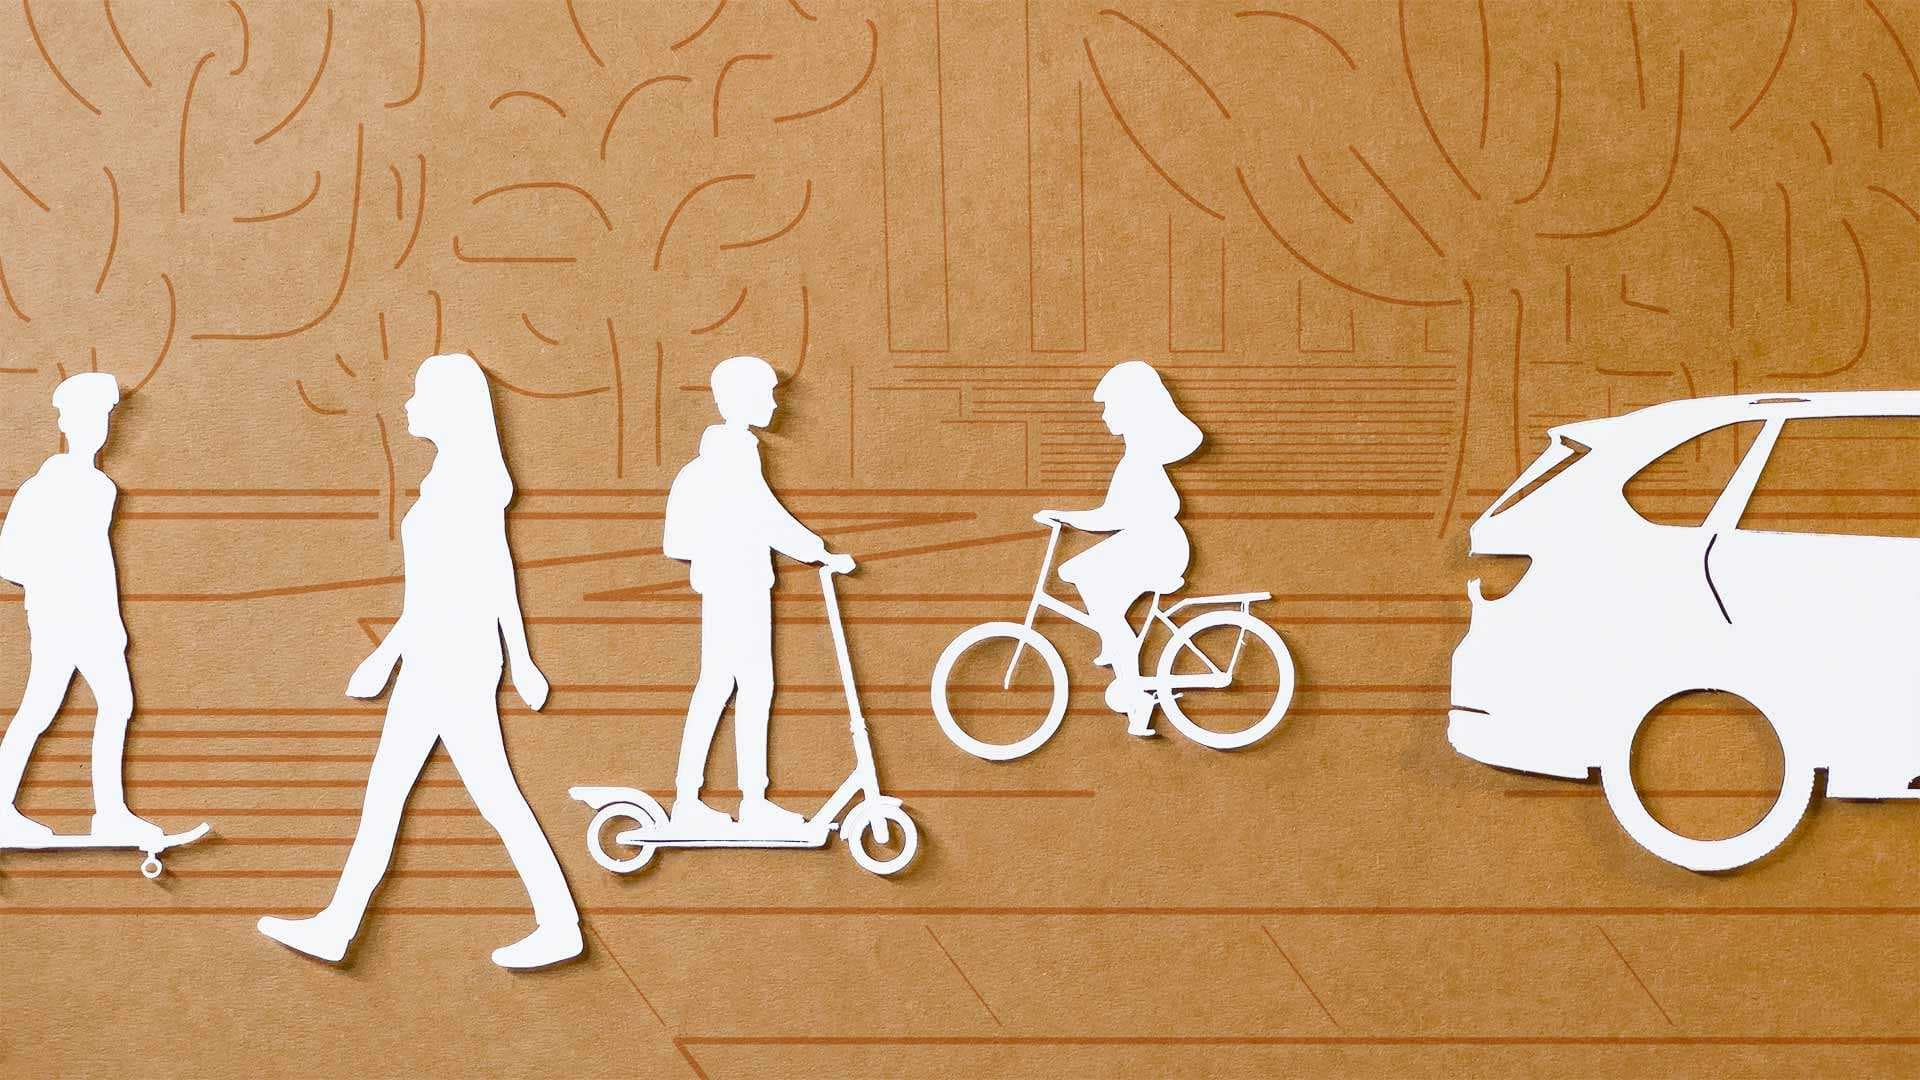 paper cutouts of people riding a skateboard, walking, riding a scooter, riding a bike, and a car